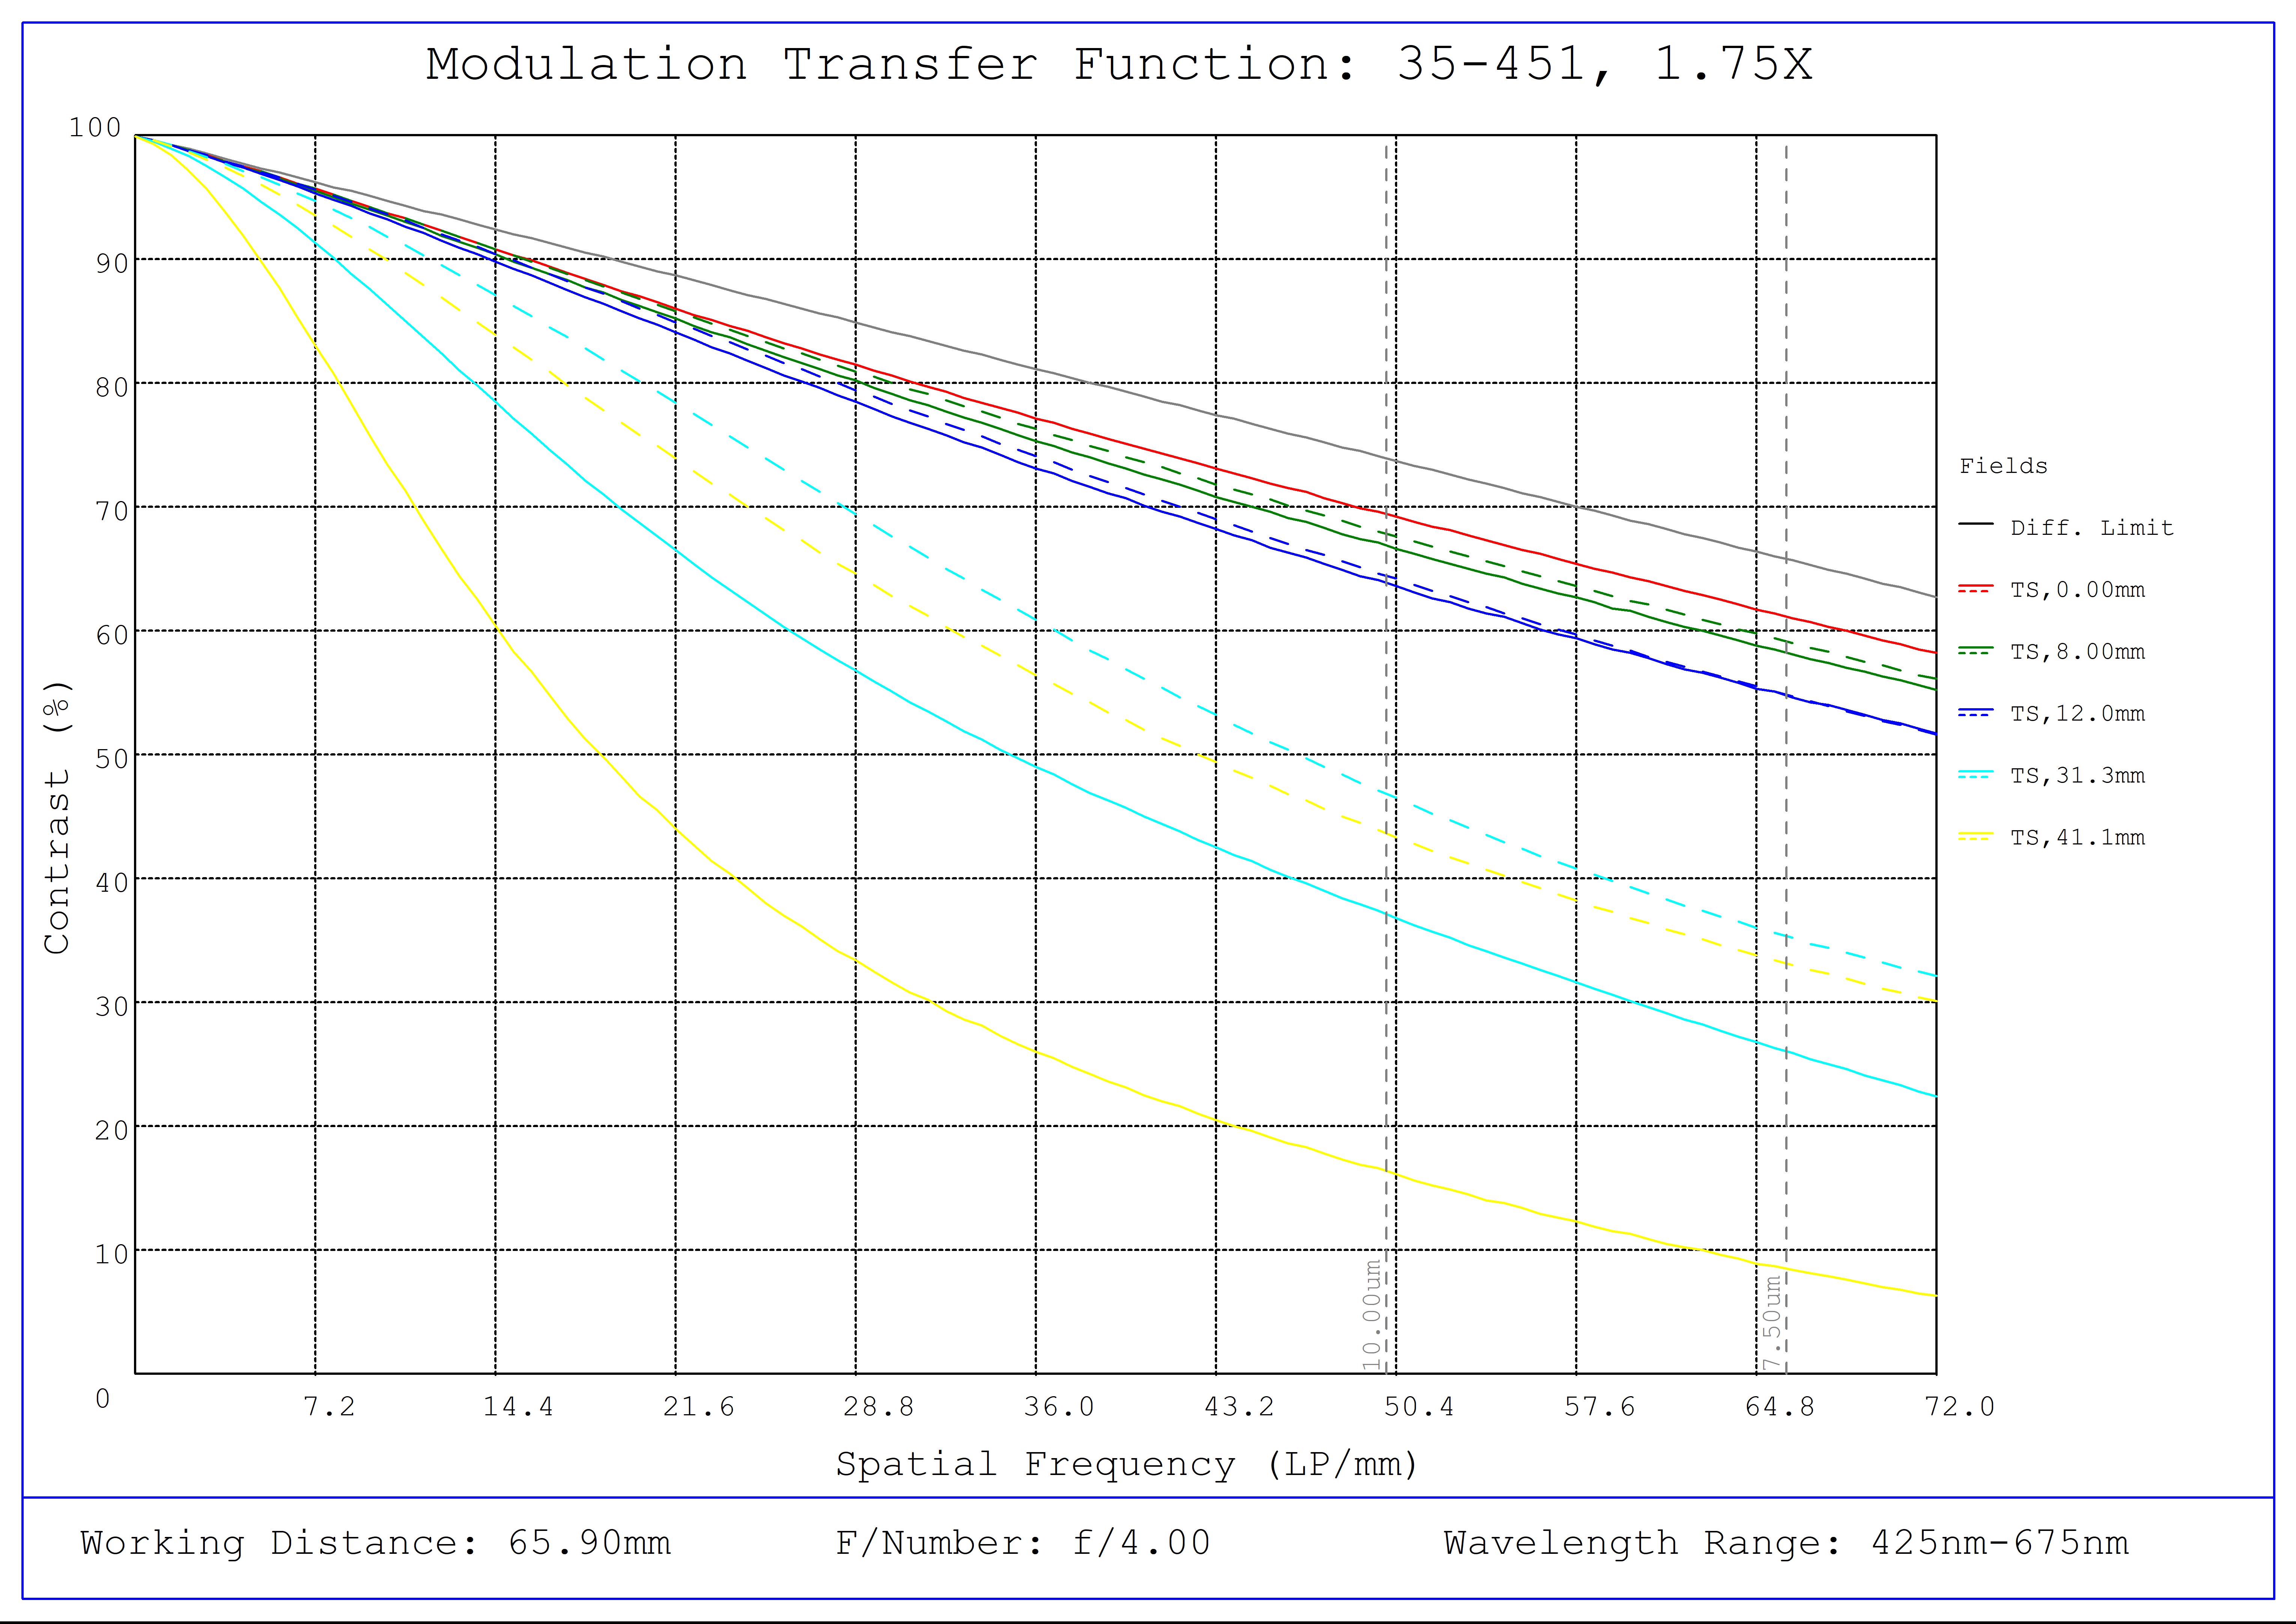 #35-451, 1.75X LS Series Area Scan Lens, Modulated Transfer Function (MTF) Plot, 65mm Working Distance, f4